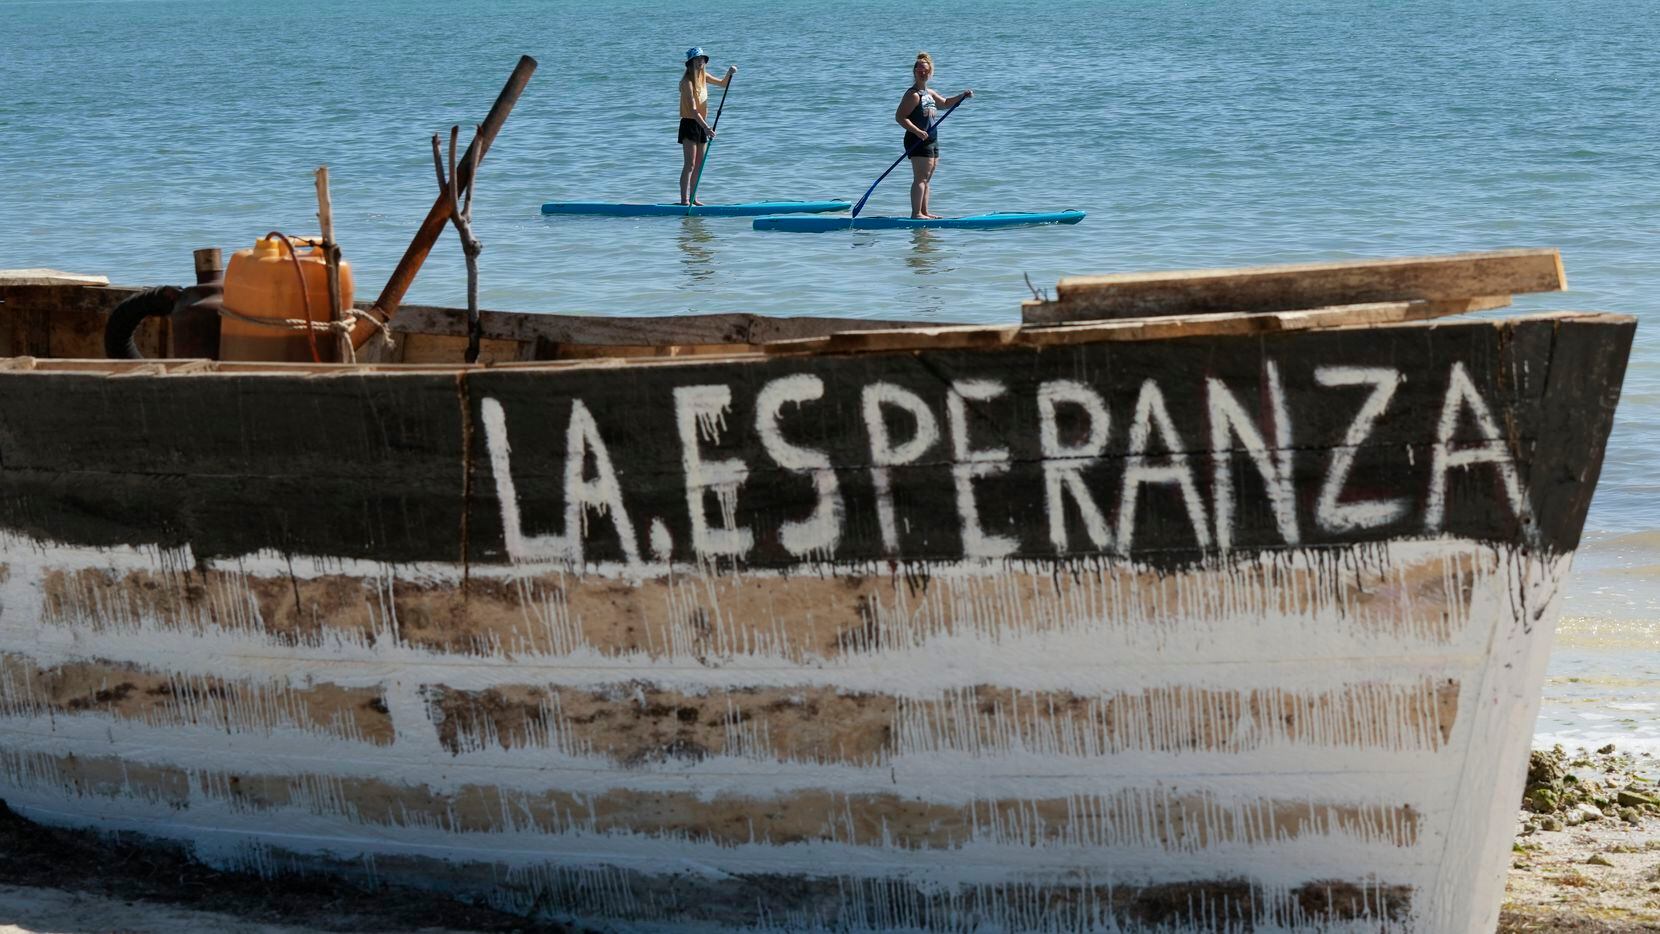 Paddleboarders draw close to get a better look at a beached migrant boat named "La...